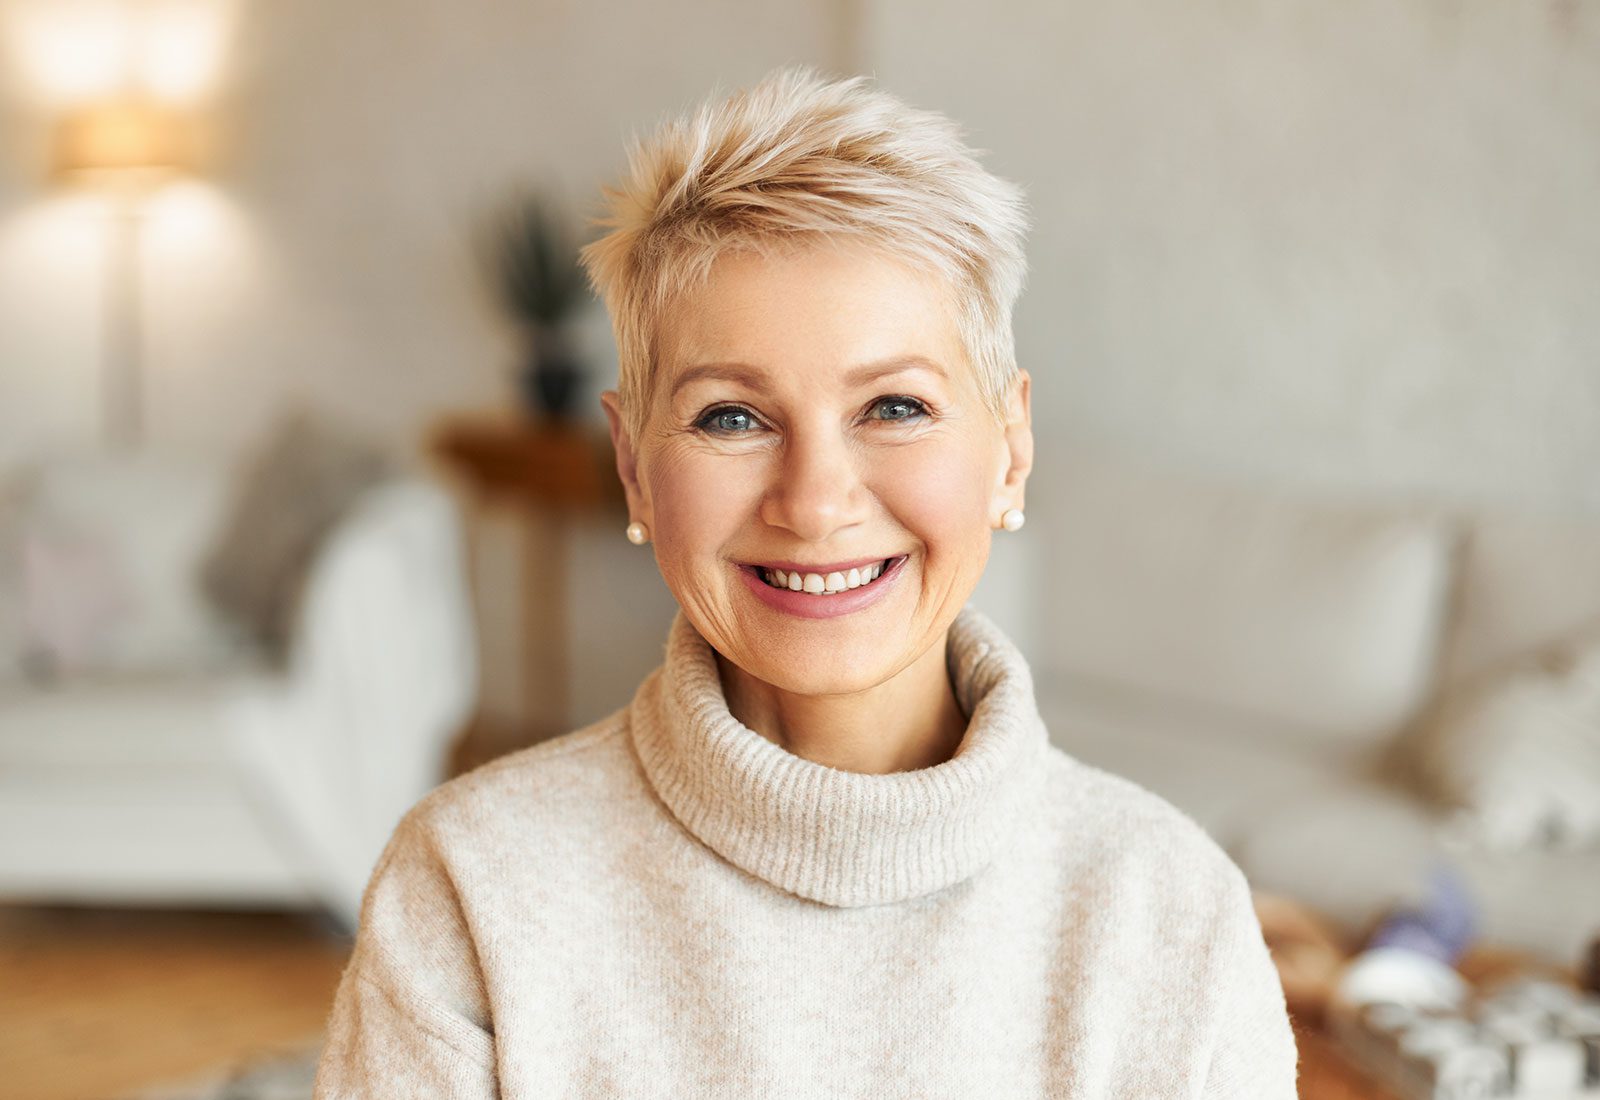 Smiling middle aged woman with short hair